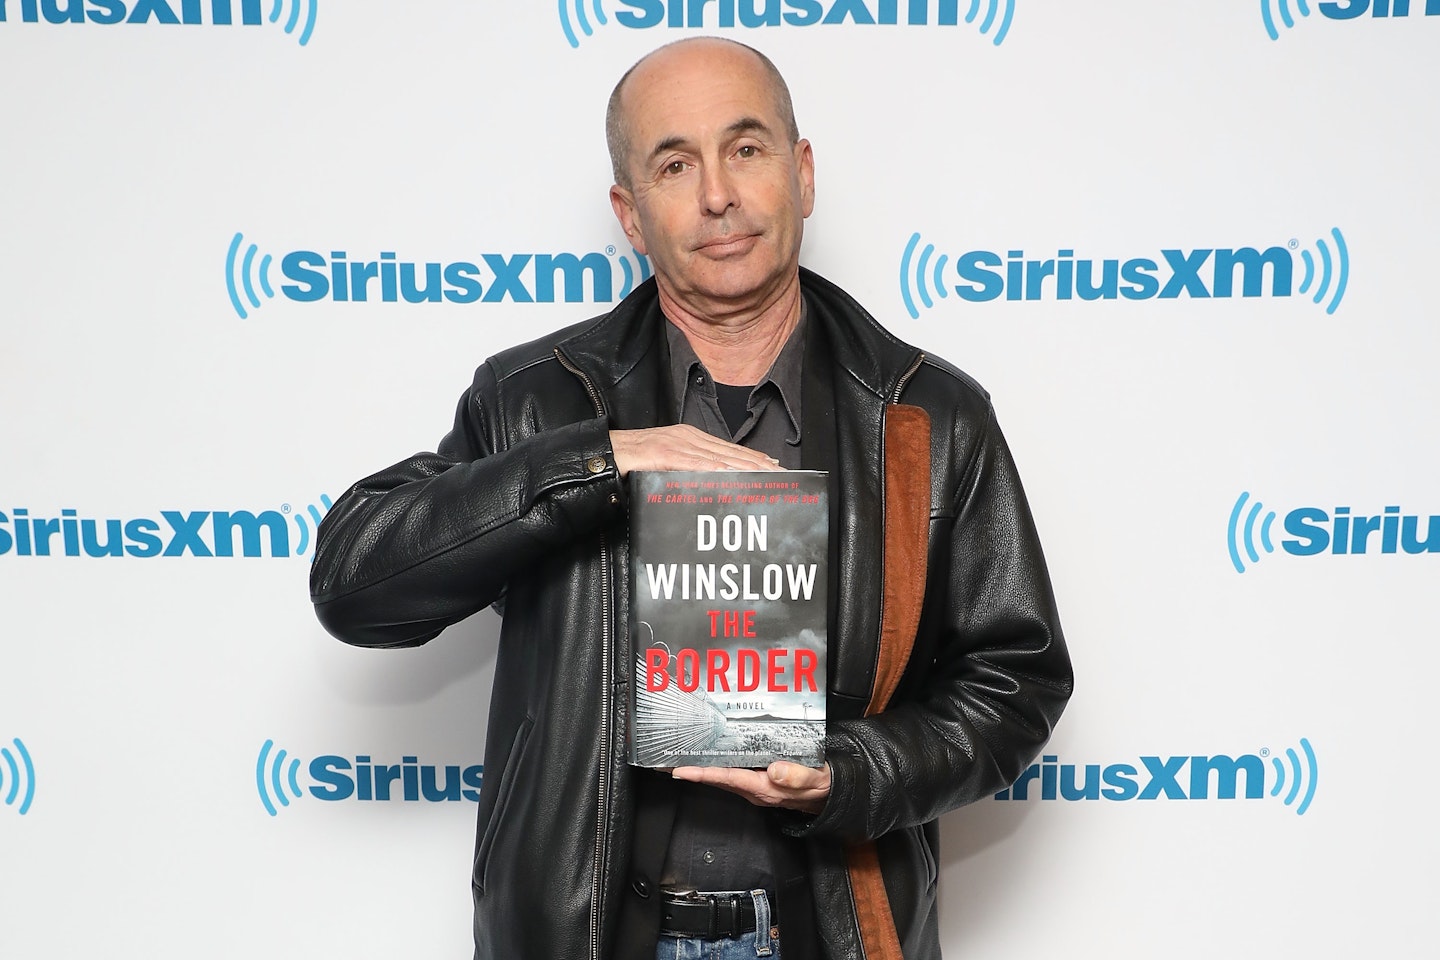 Don Winslow's Cartel Book Trilogy To Become A TV Series, Movies